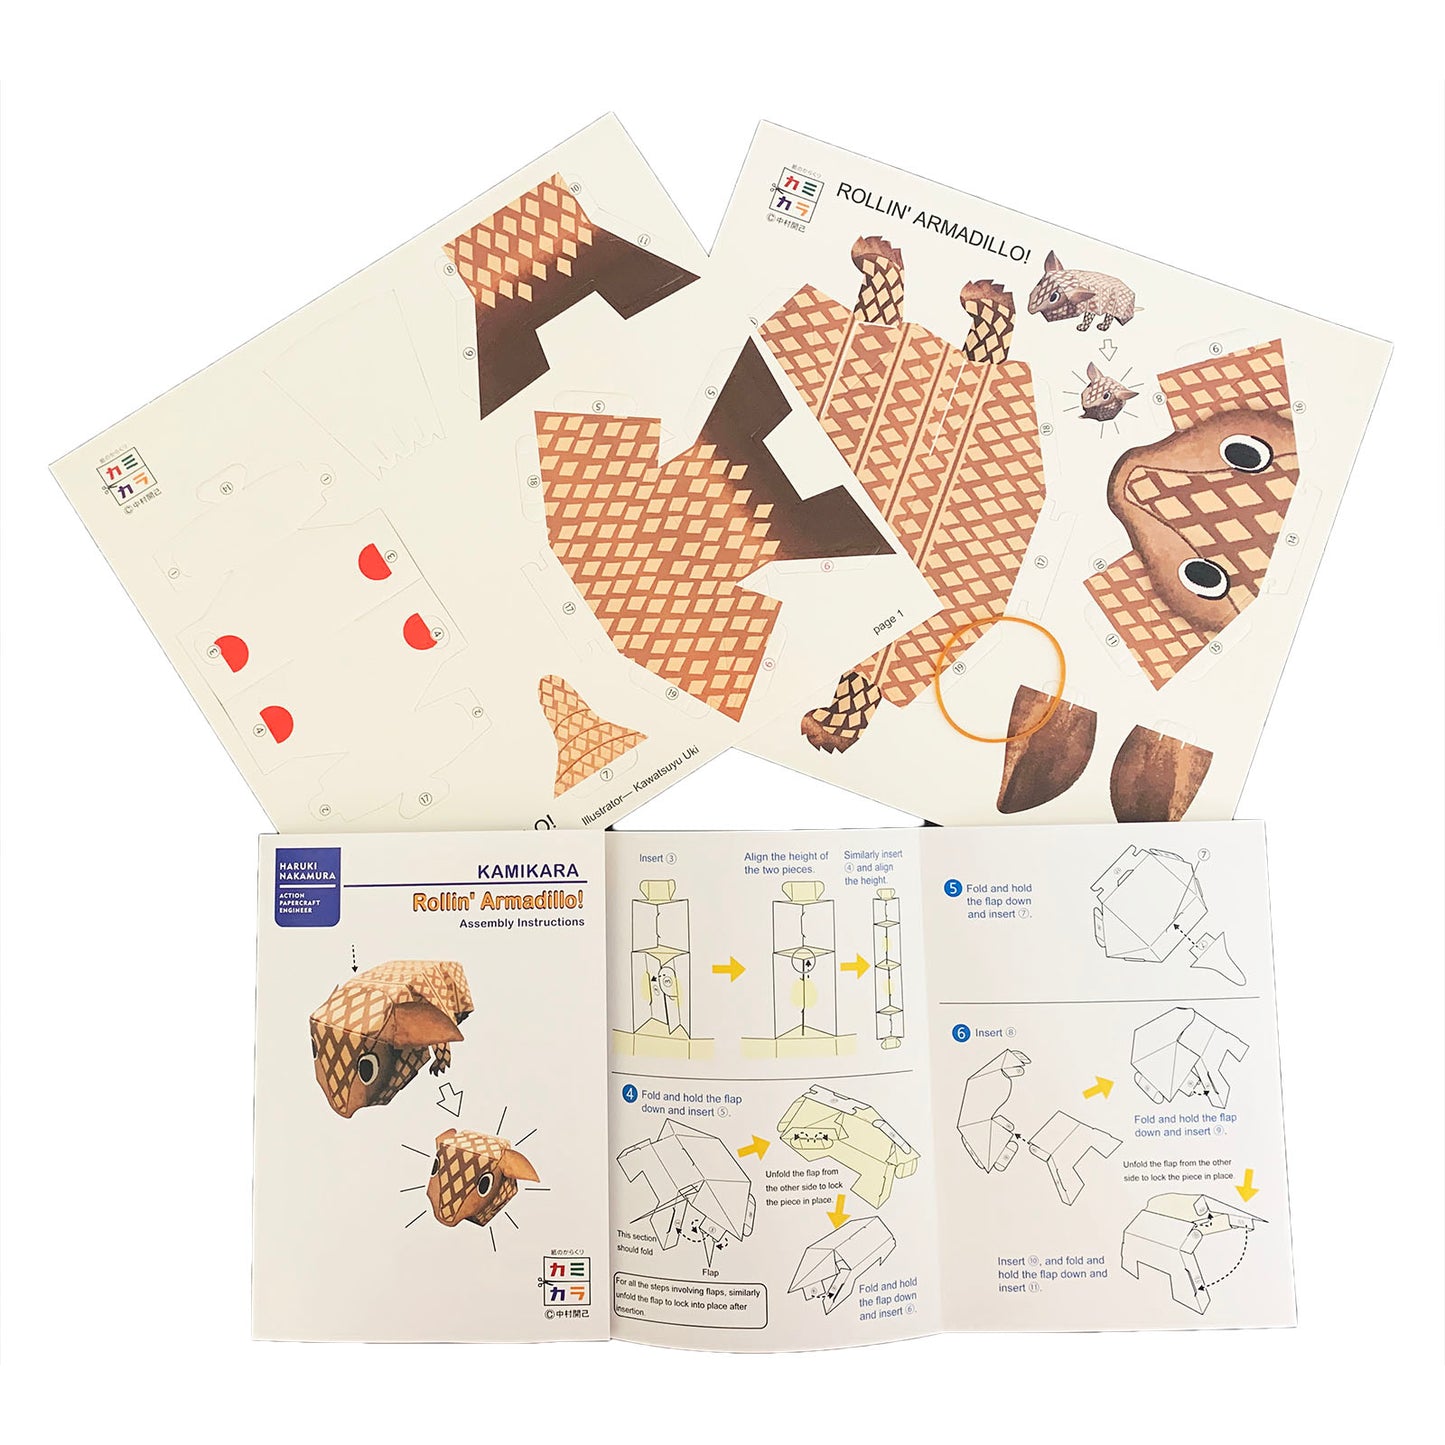 Components of the rollin armadillo kit with instruction booklet